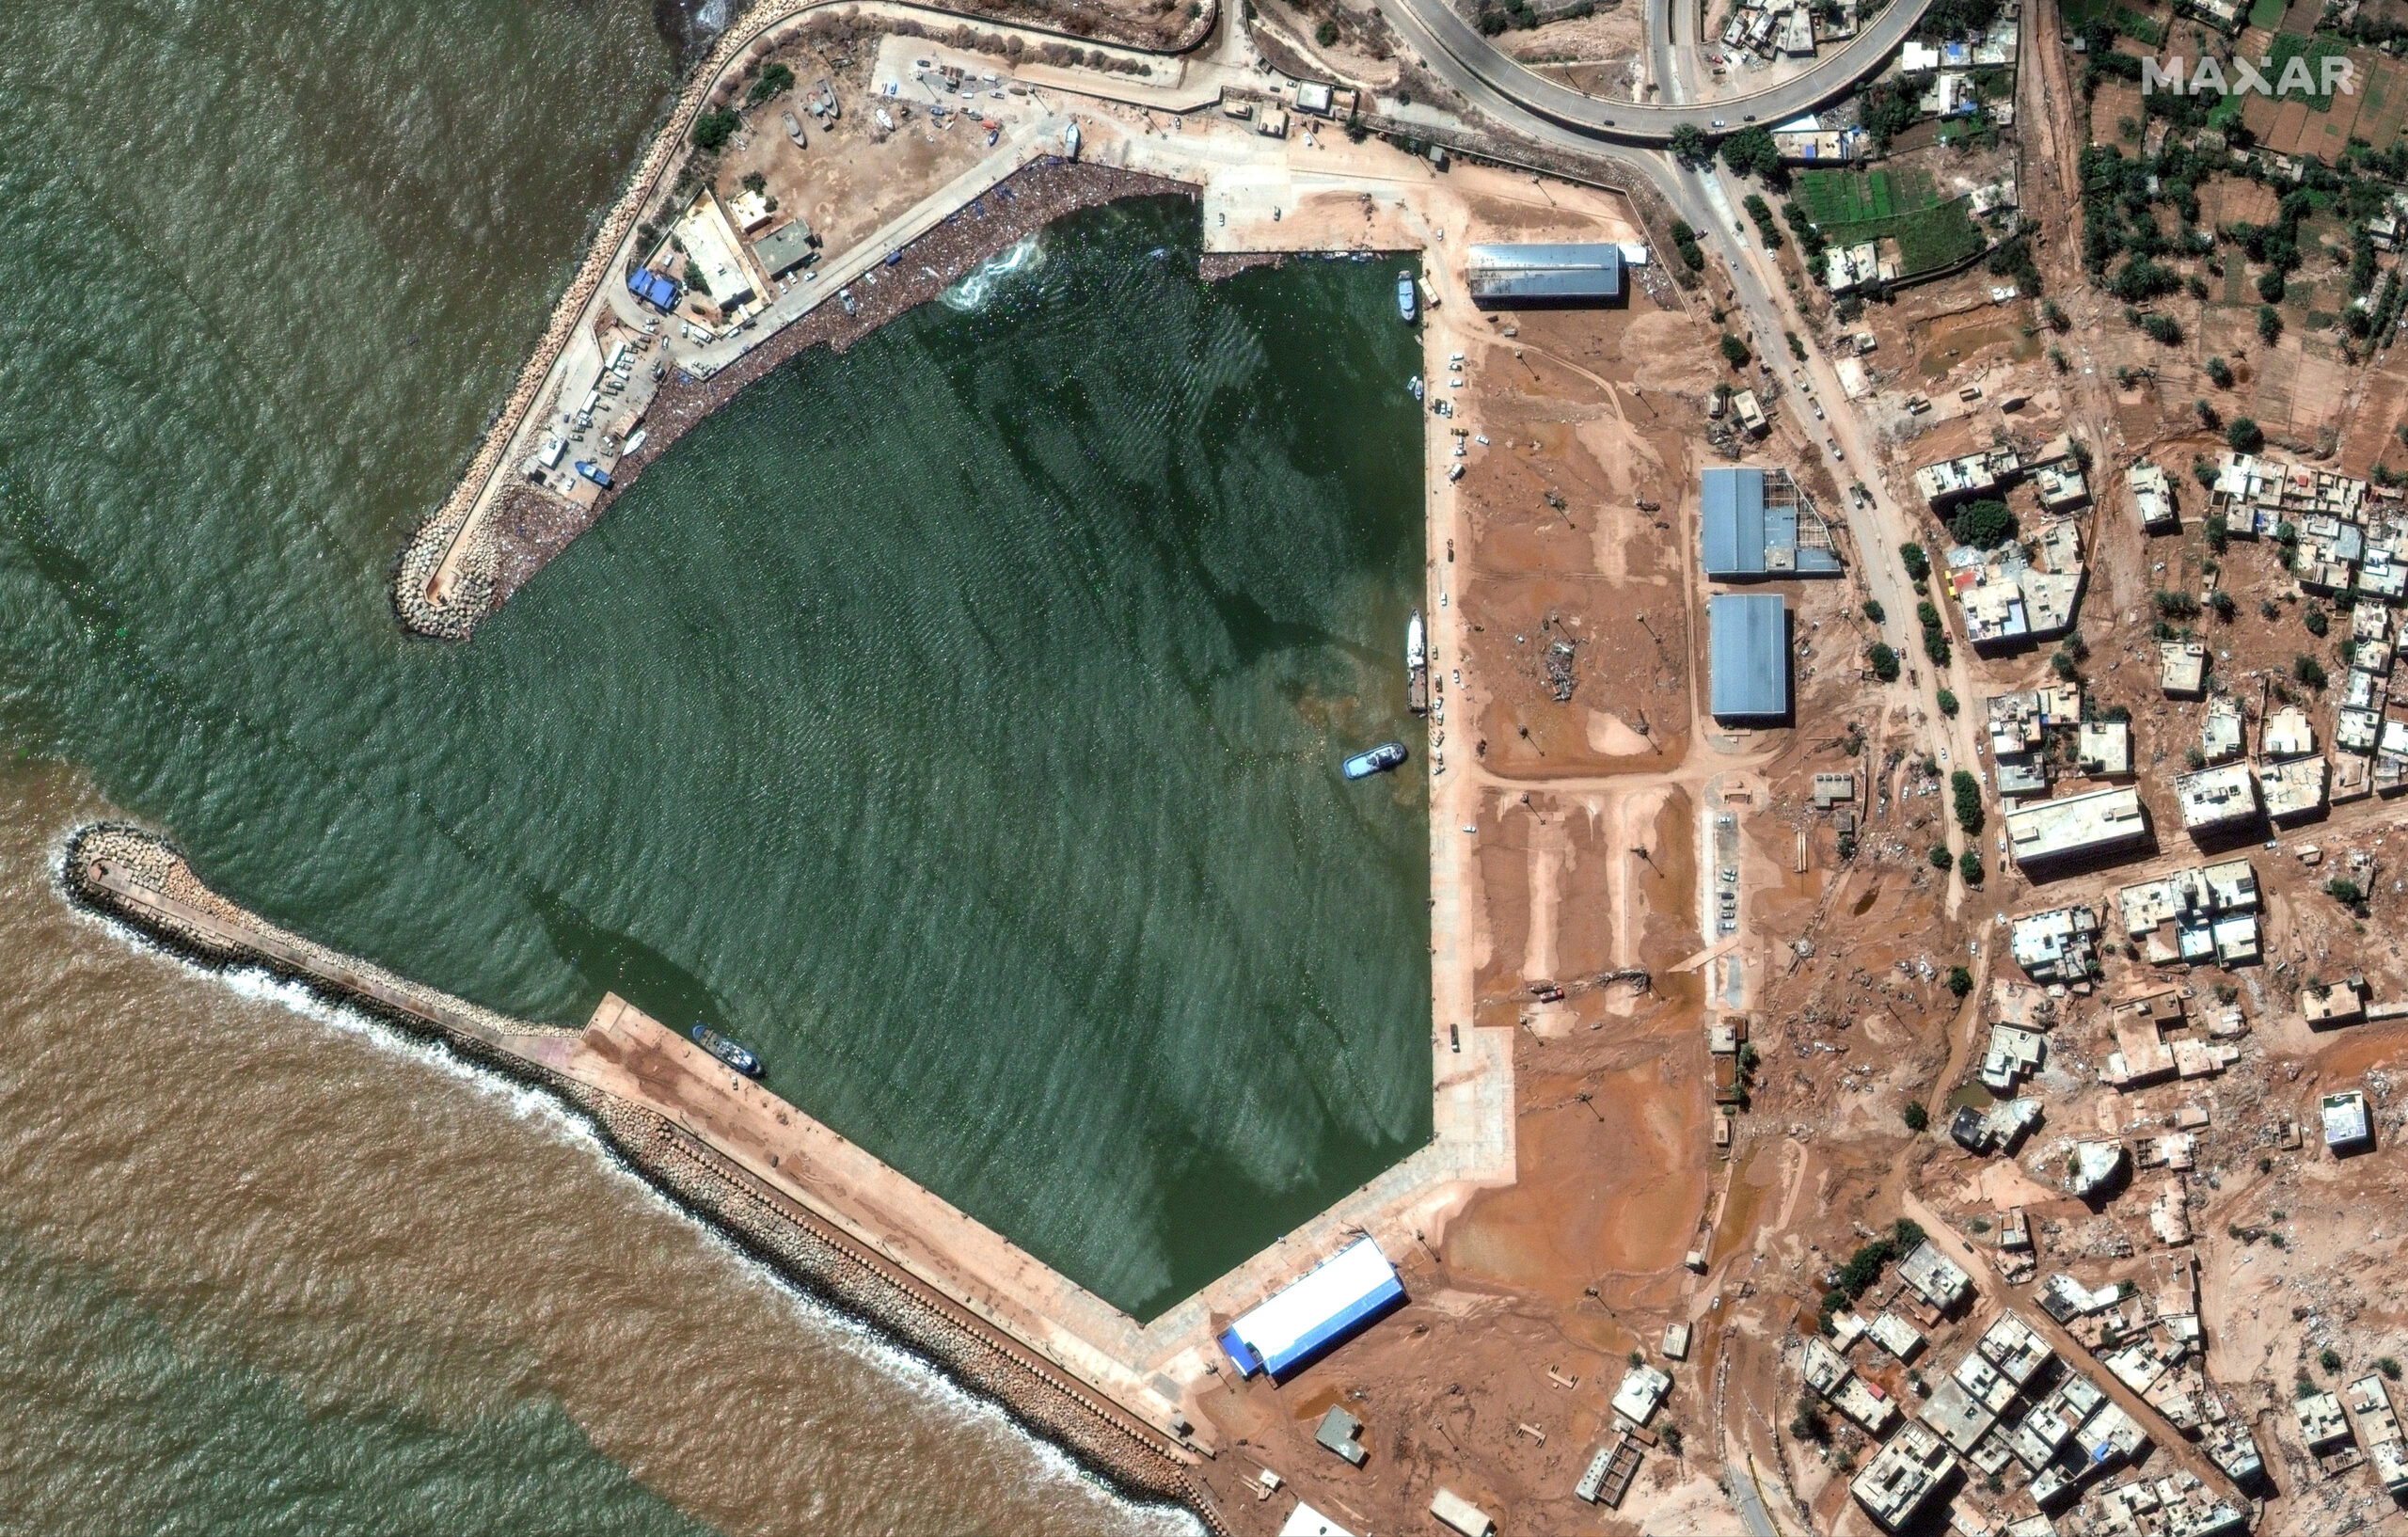 A satellite image shows port facilities in the aftermath of the floods in Derna. Photo Maxar?Technologies/Handout via REUTERS.